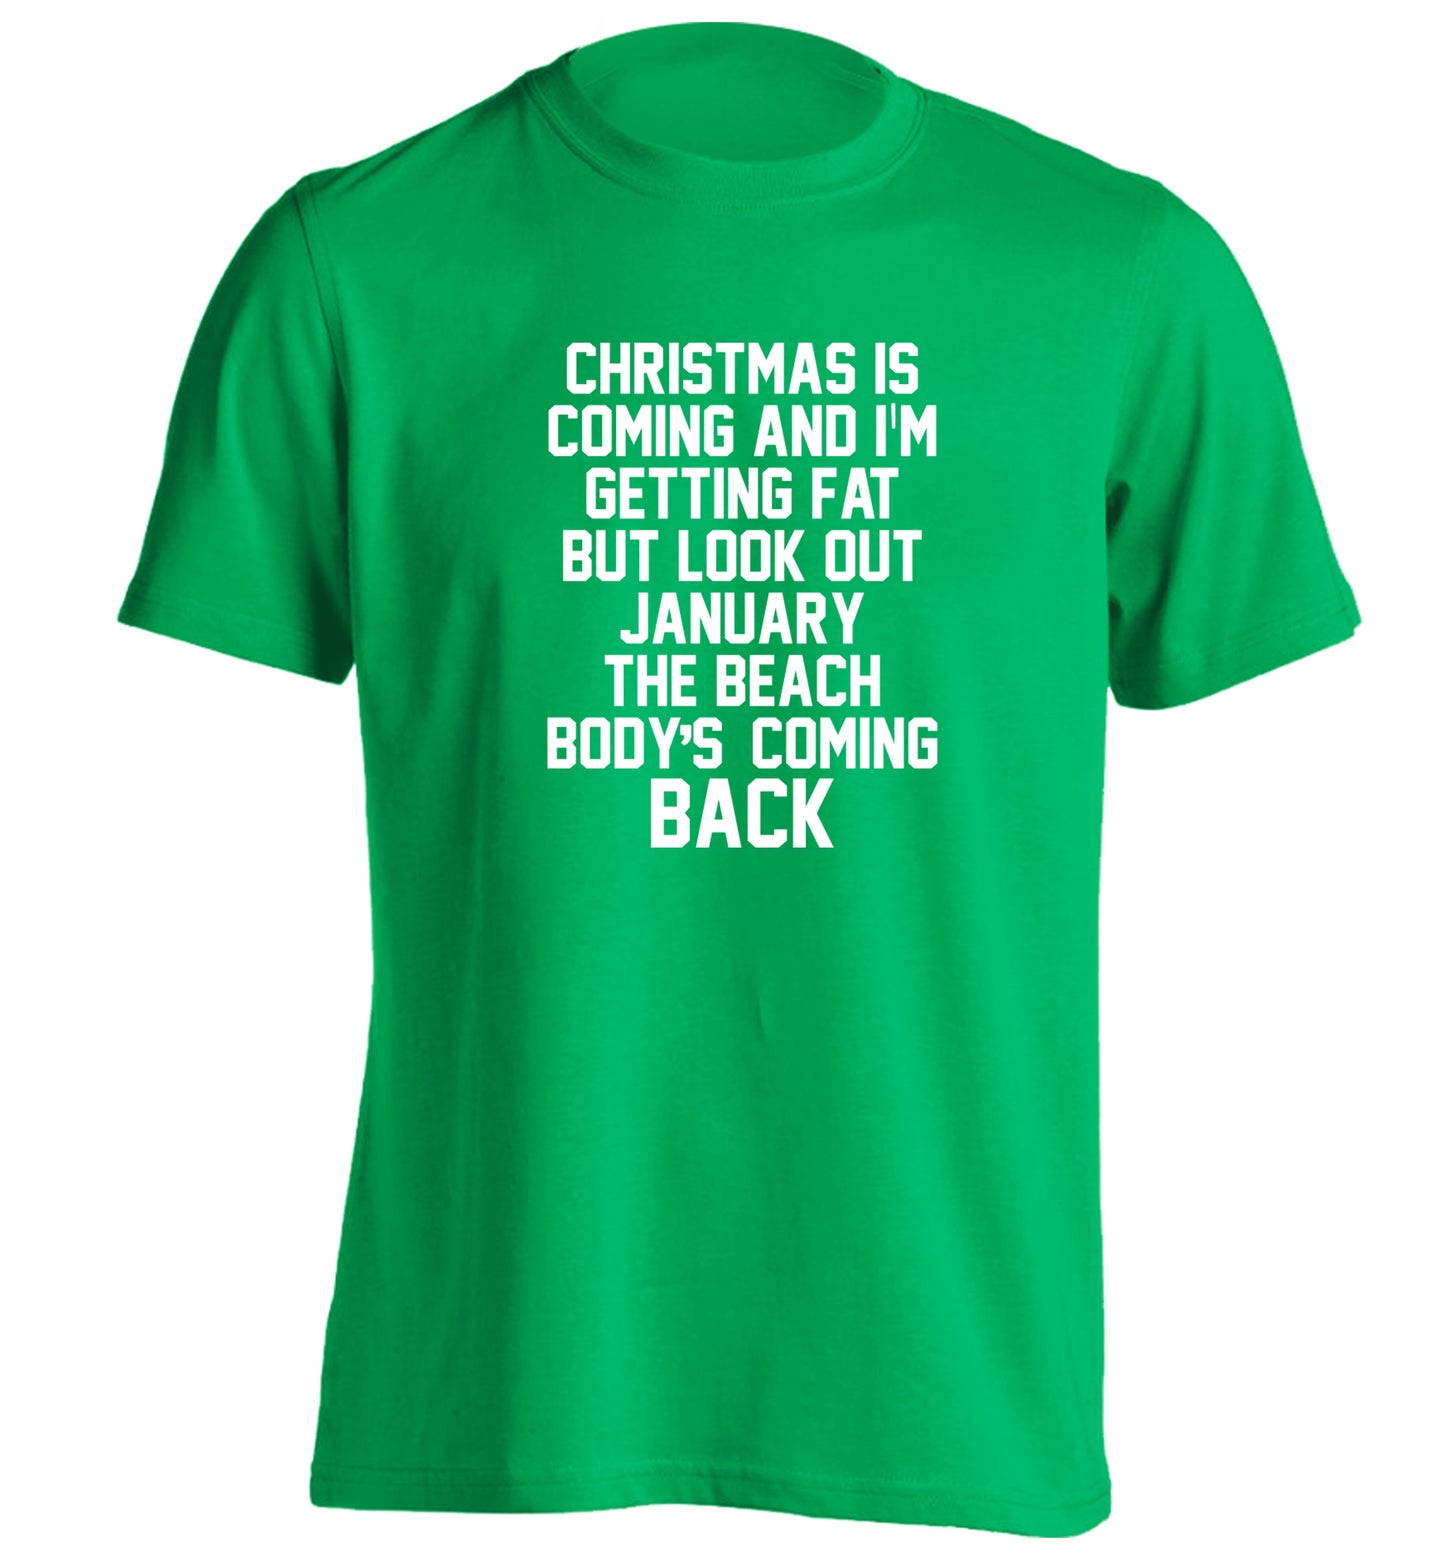 Christmas is coming and I'm getting fat but look out January the beach body's coming back! adults unisex green Tshirt 2XL